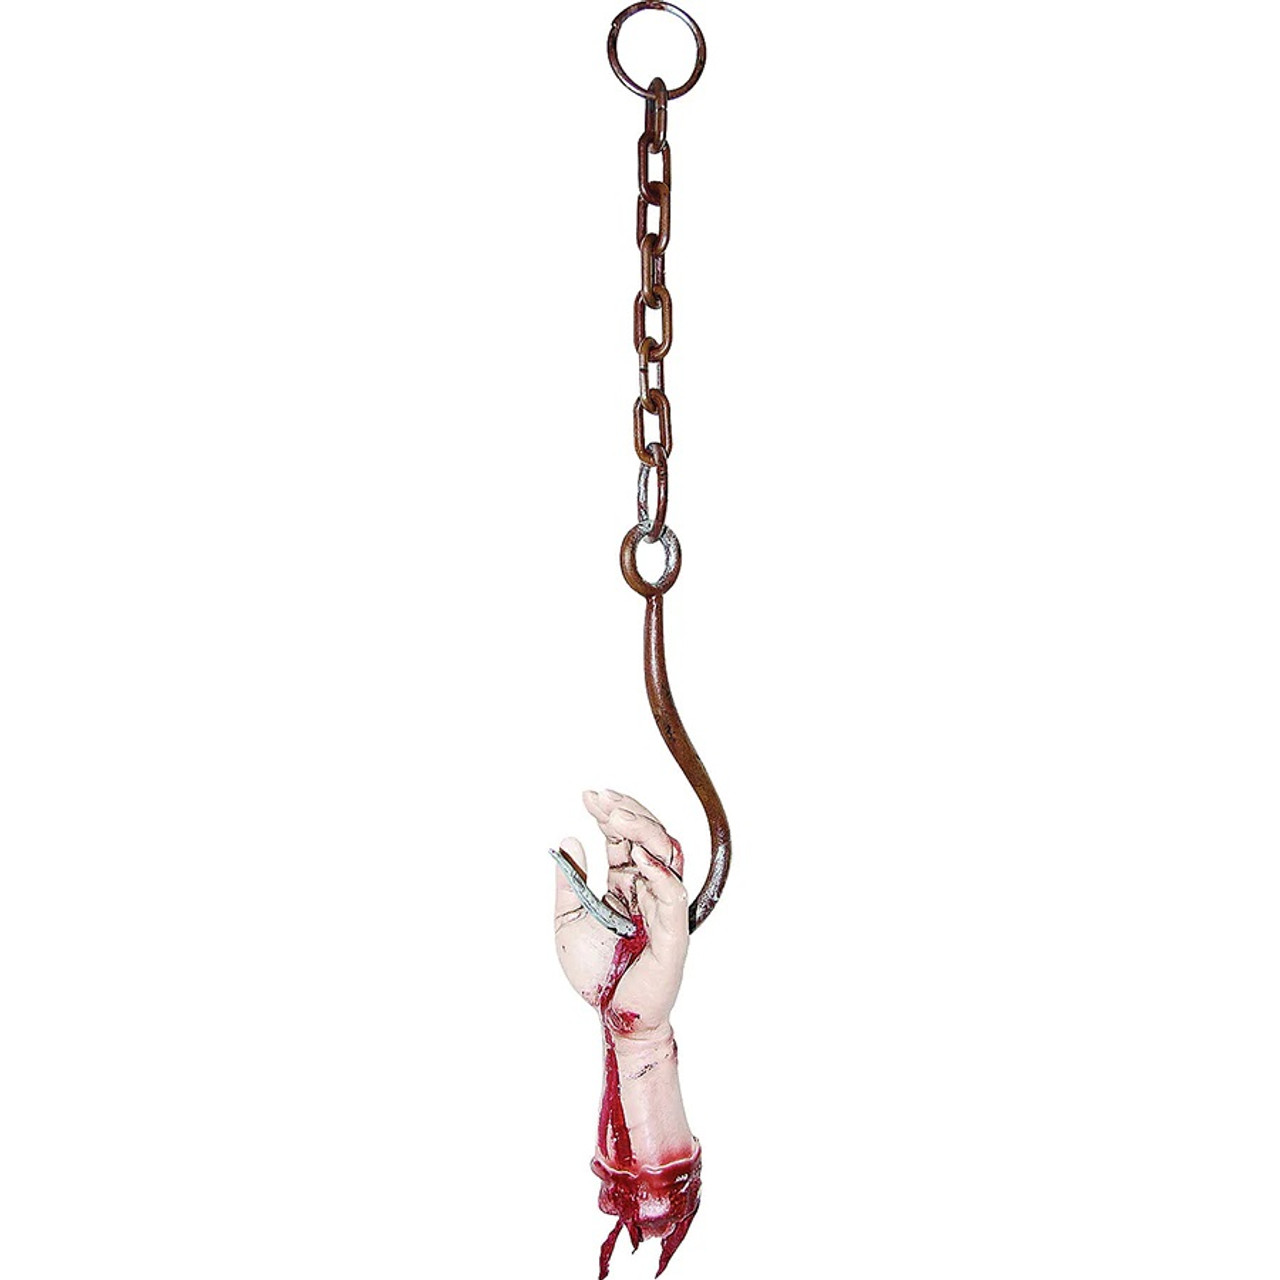 Iron Meat Hook & Severed Bloody Hand Decoration Halloween Prop Haunted House